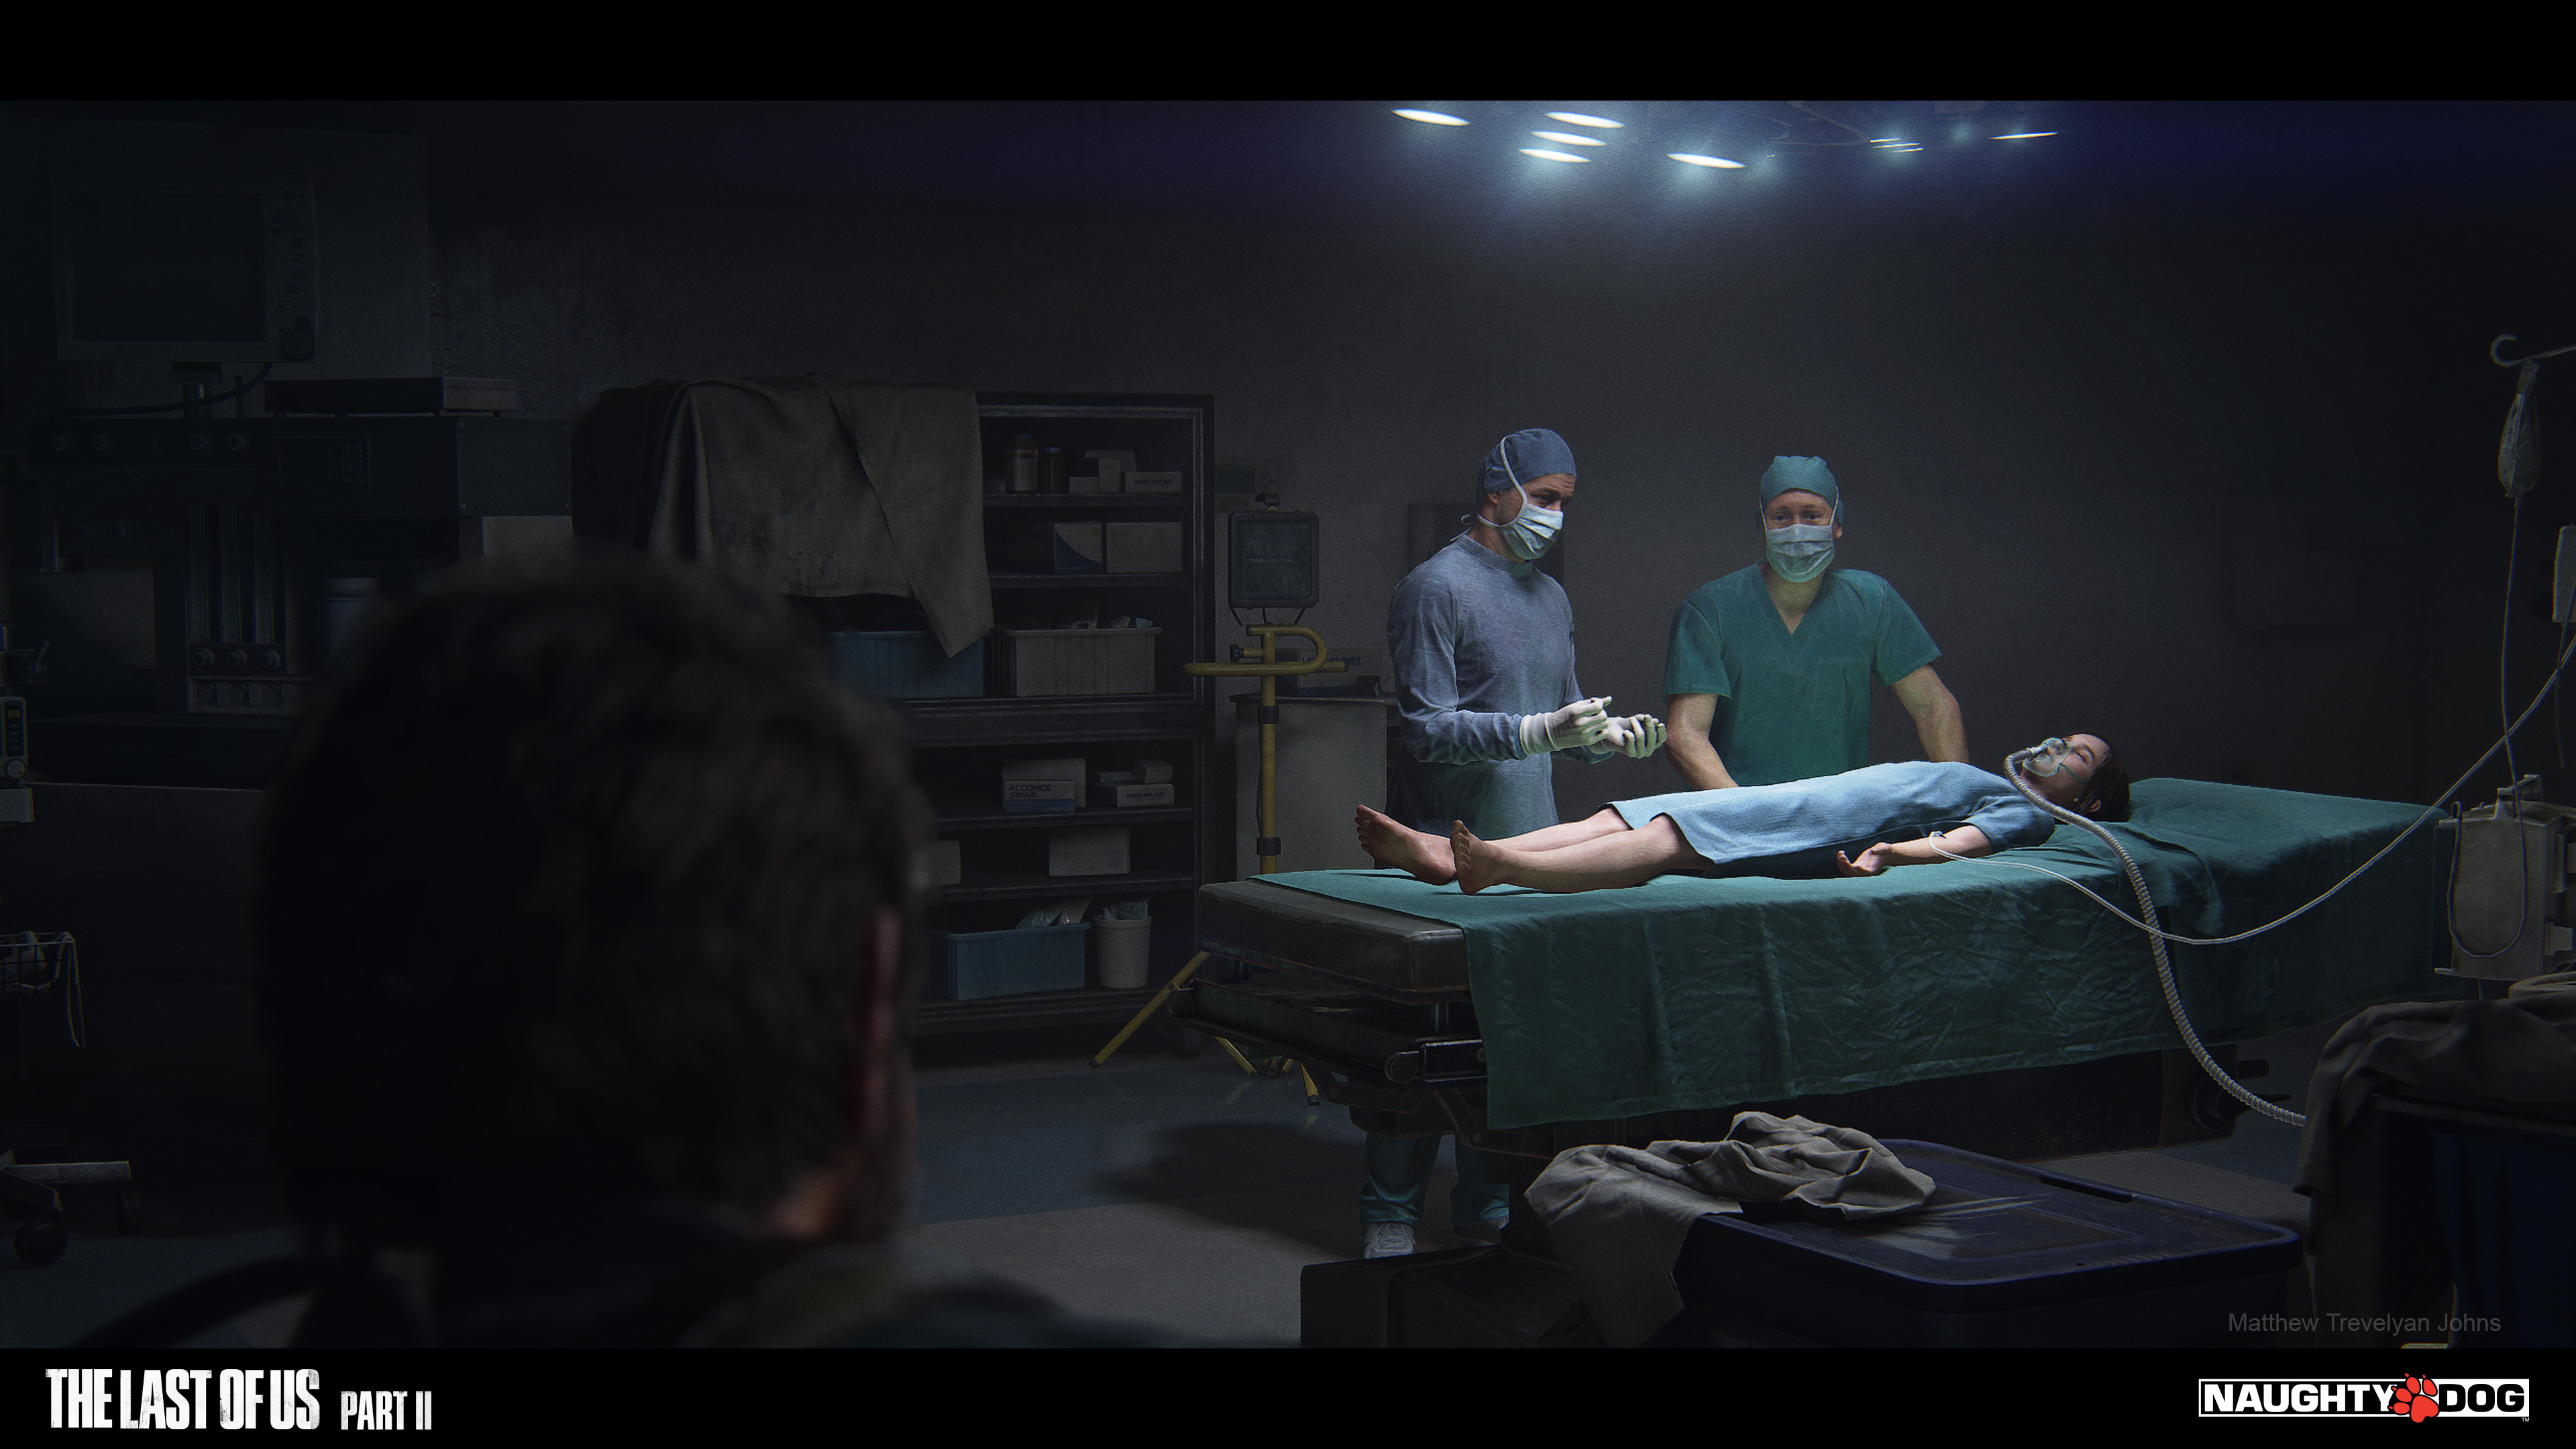 I worked on multiple version of this surgery room, it was seen in 5 different sequences, with different lighting, prop placement and shader blends, managing these scenes and ensuring consistency of key elements throughout was a challenge!